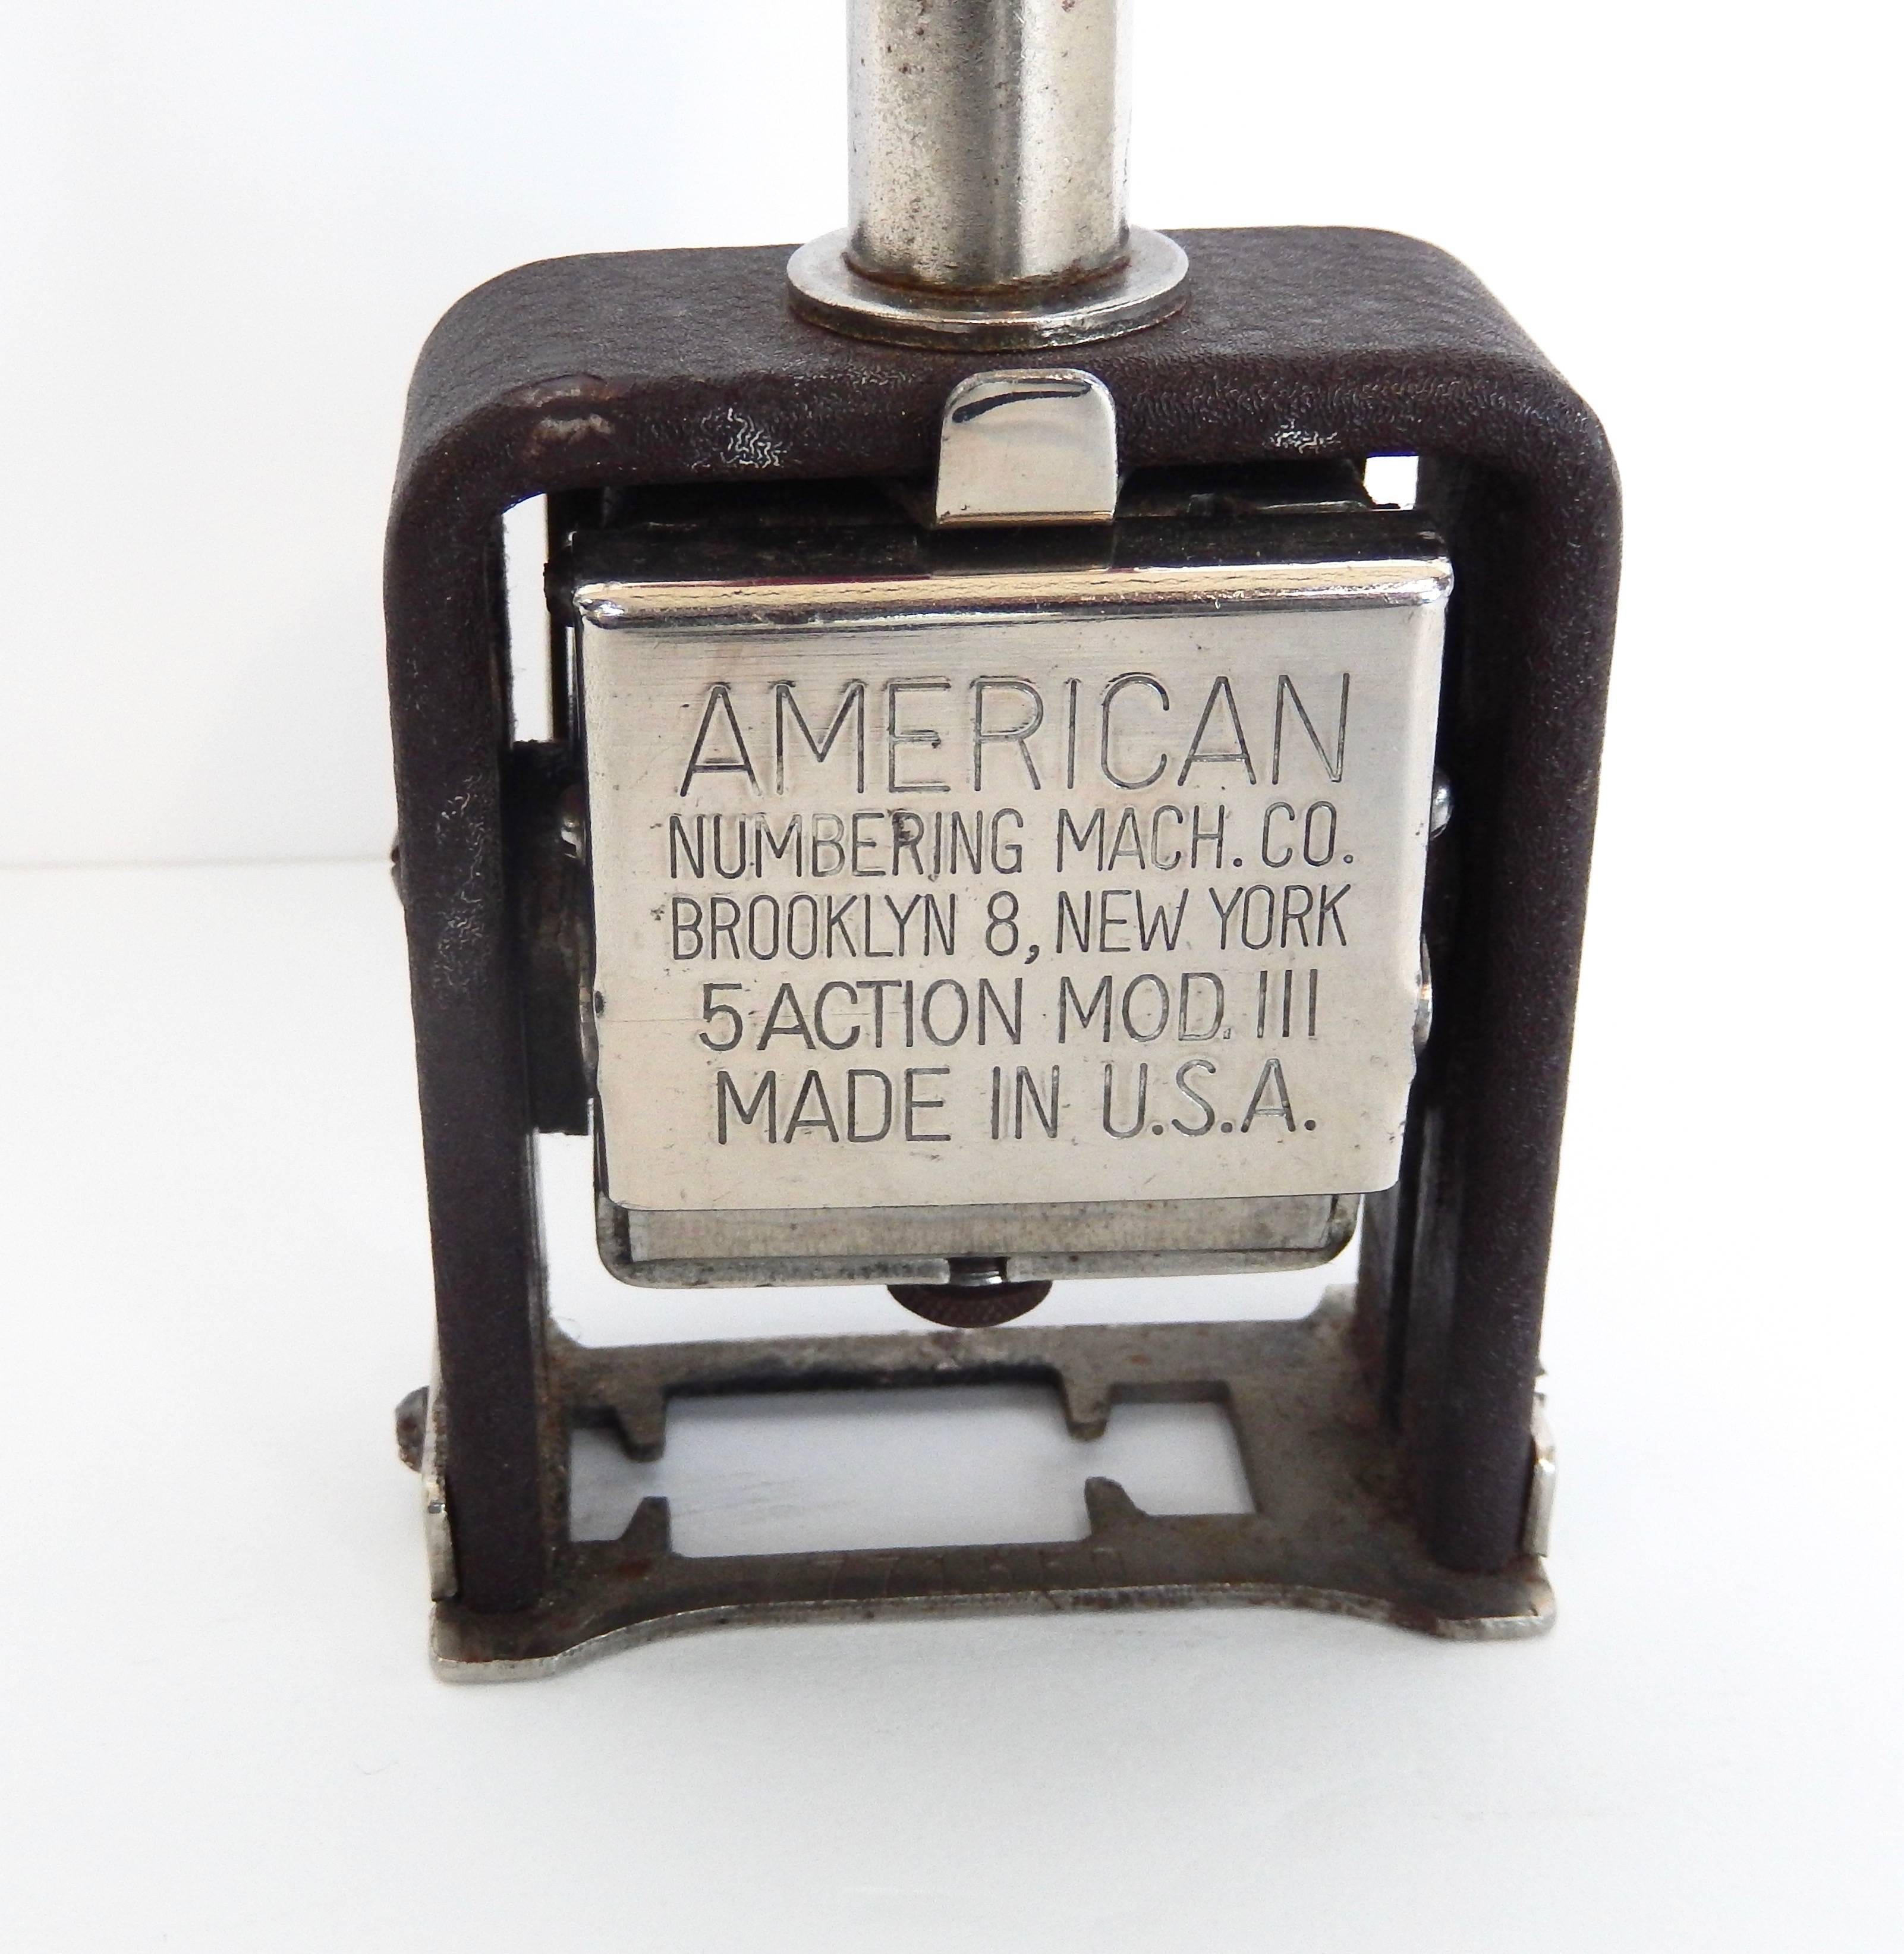 This vintage numbering stamp, with a striking red handle, is an interesting example of Art Deco design in commercial products. A nostalgic reminder of life before computers. Made by the American Numbering Machine Company in Brooklyn.